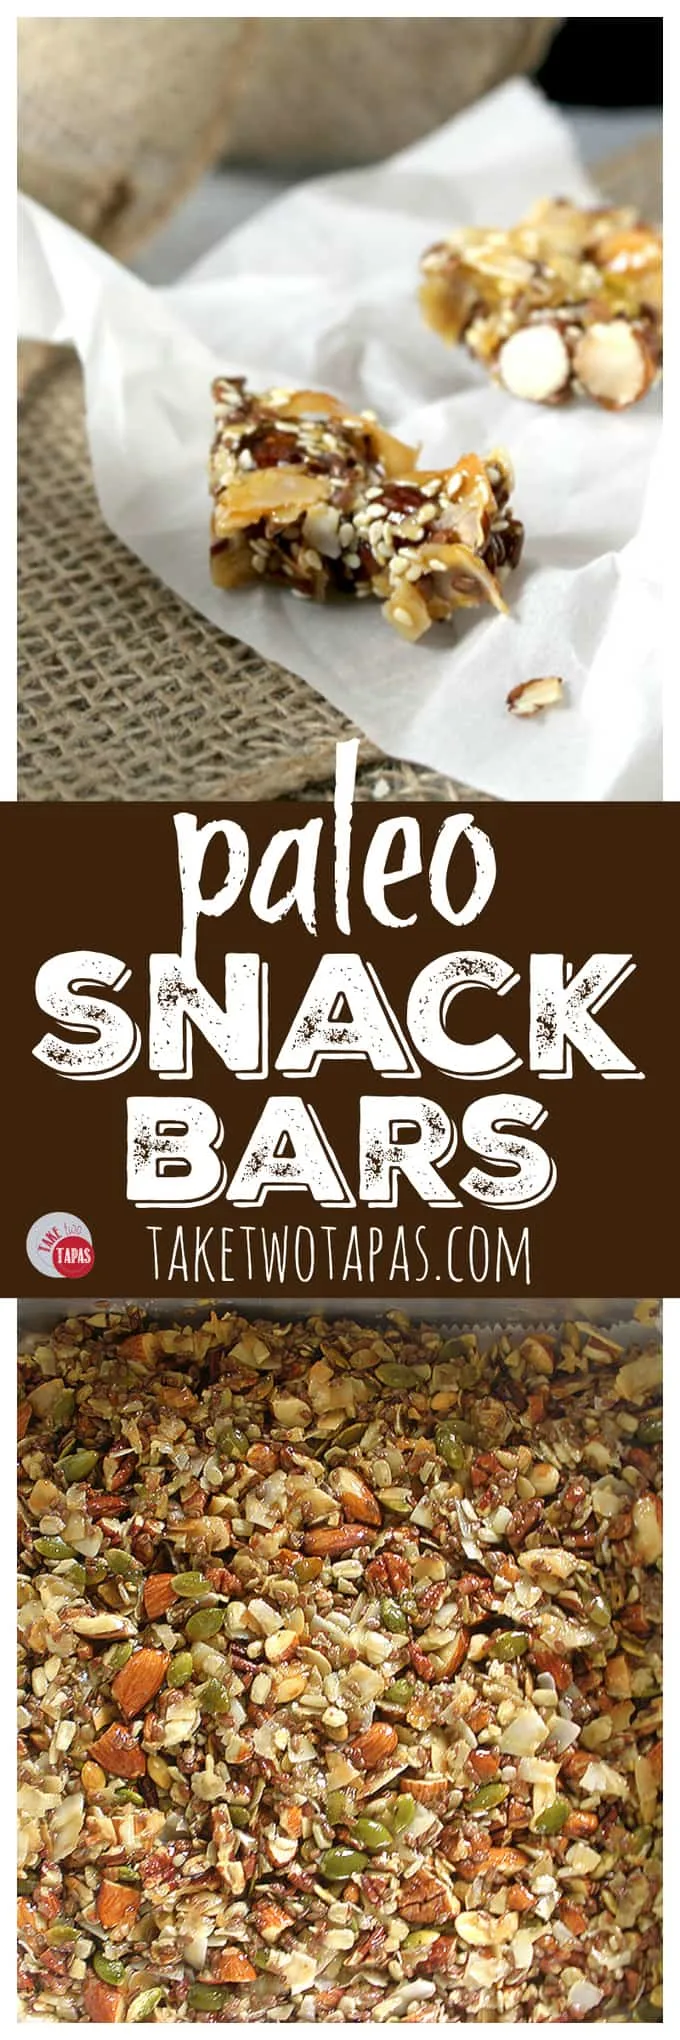 Pinterest image with text "Paleo Snack Bars"